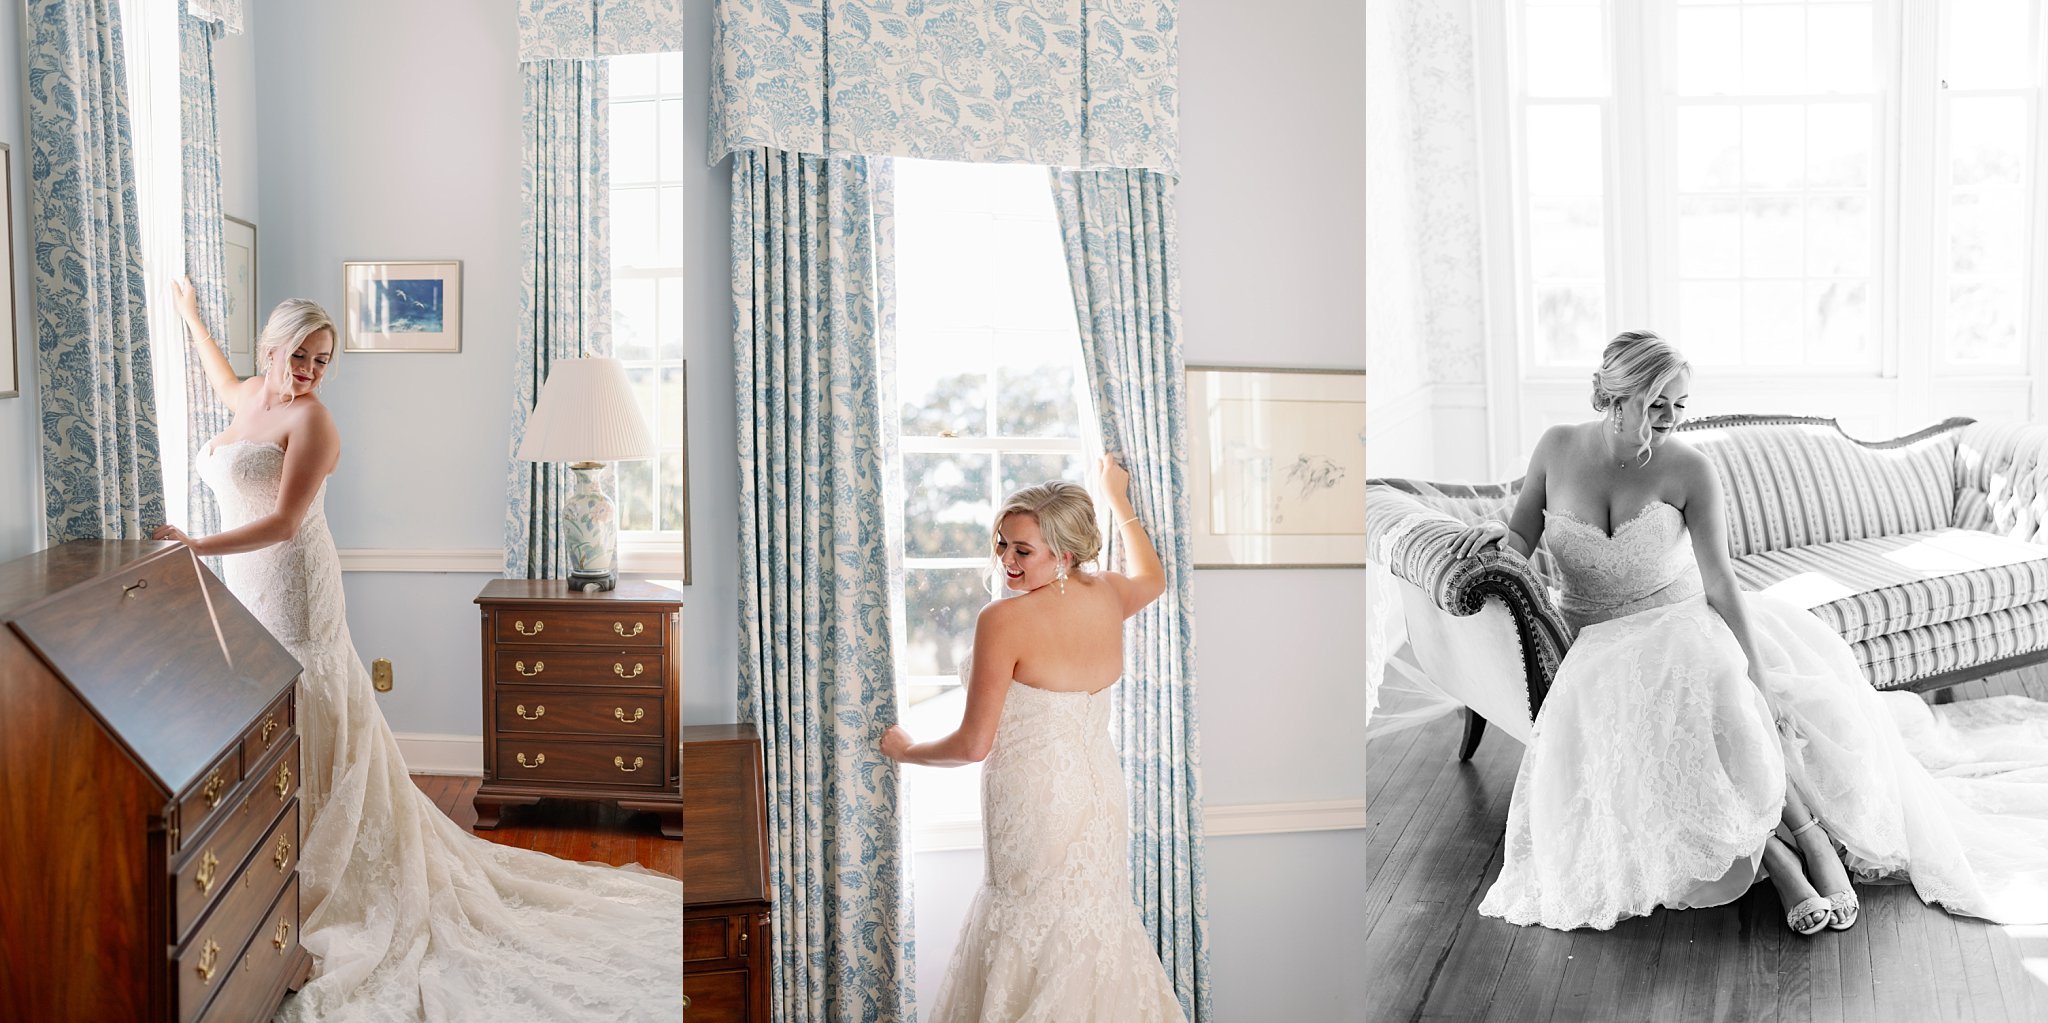 Classic southern wedding at historic house wedding venue in Beaufort South Carolina. Photographs of lowcountry waterfront wedding by Charleston SC wedding photographer Kayla Nelson Photography.